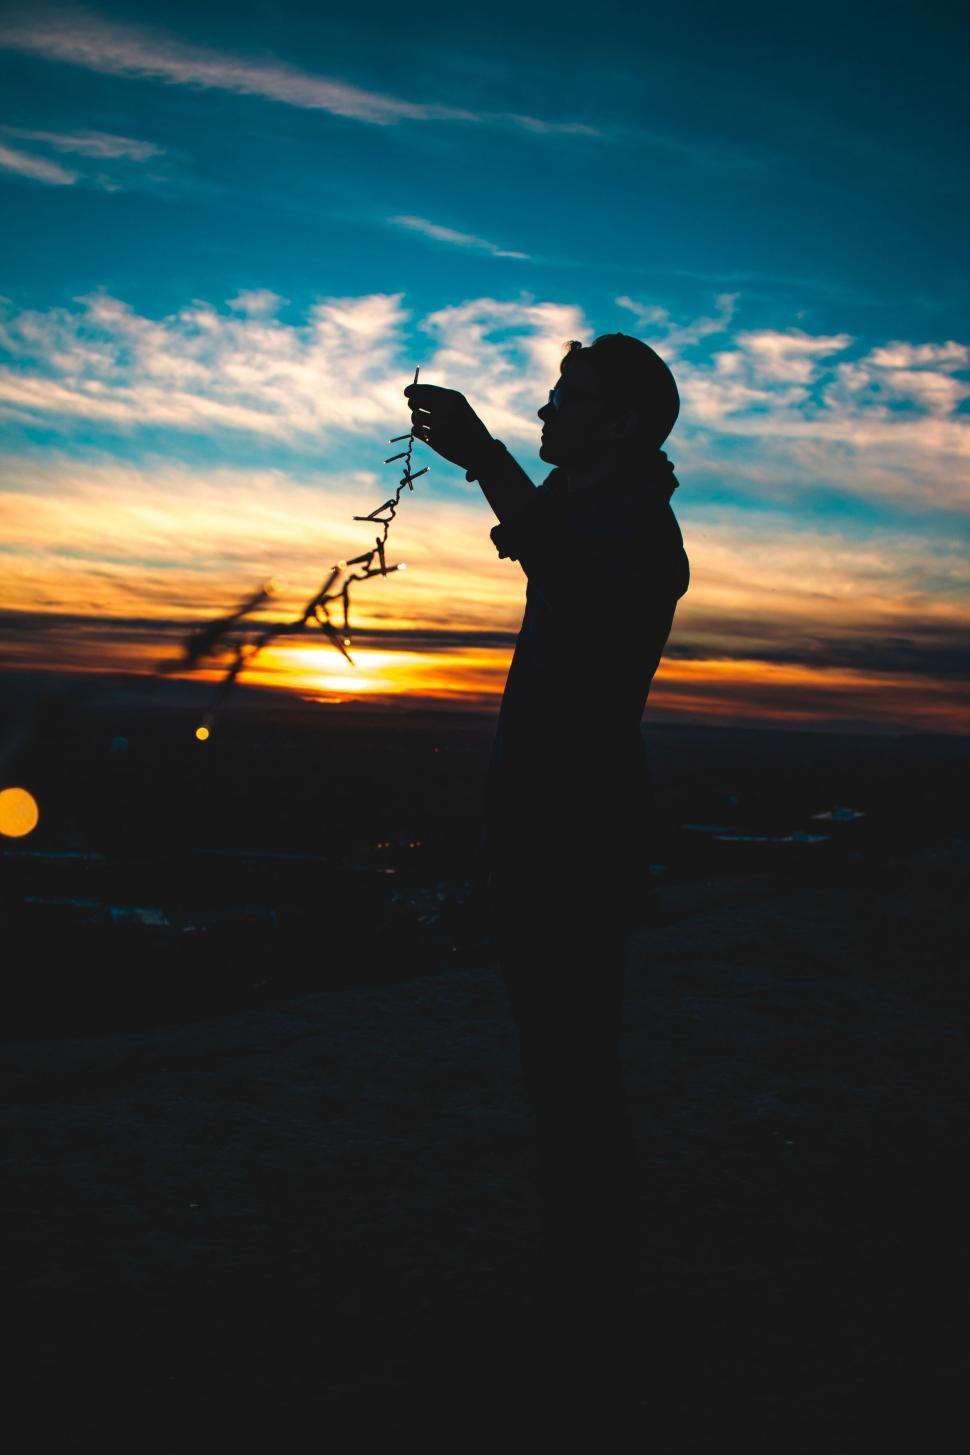 Free Image of Person Holding Camera Silhouette at Sunset 